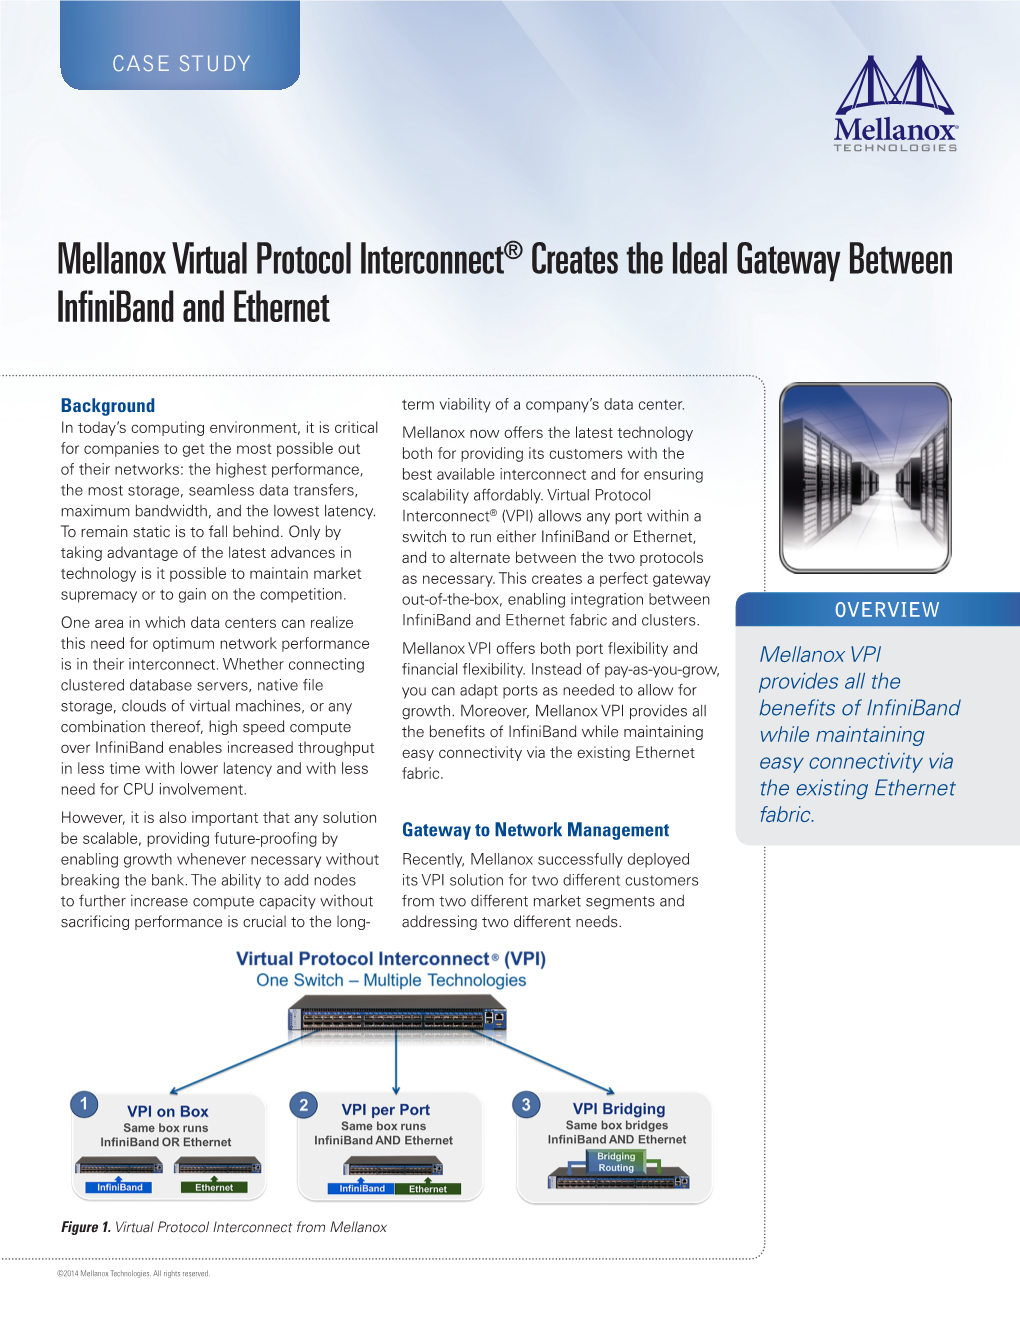 Mellanox Virtual Protocol Interconnect® Creates the Ideal Gateway Between Infiniband and Ethernet